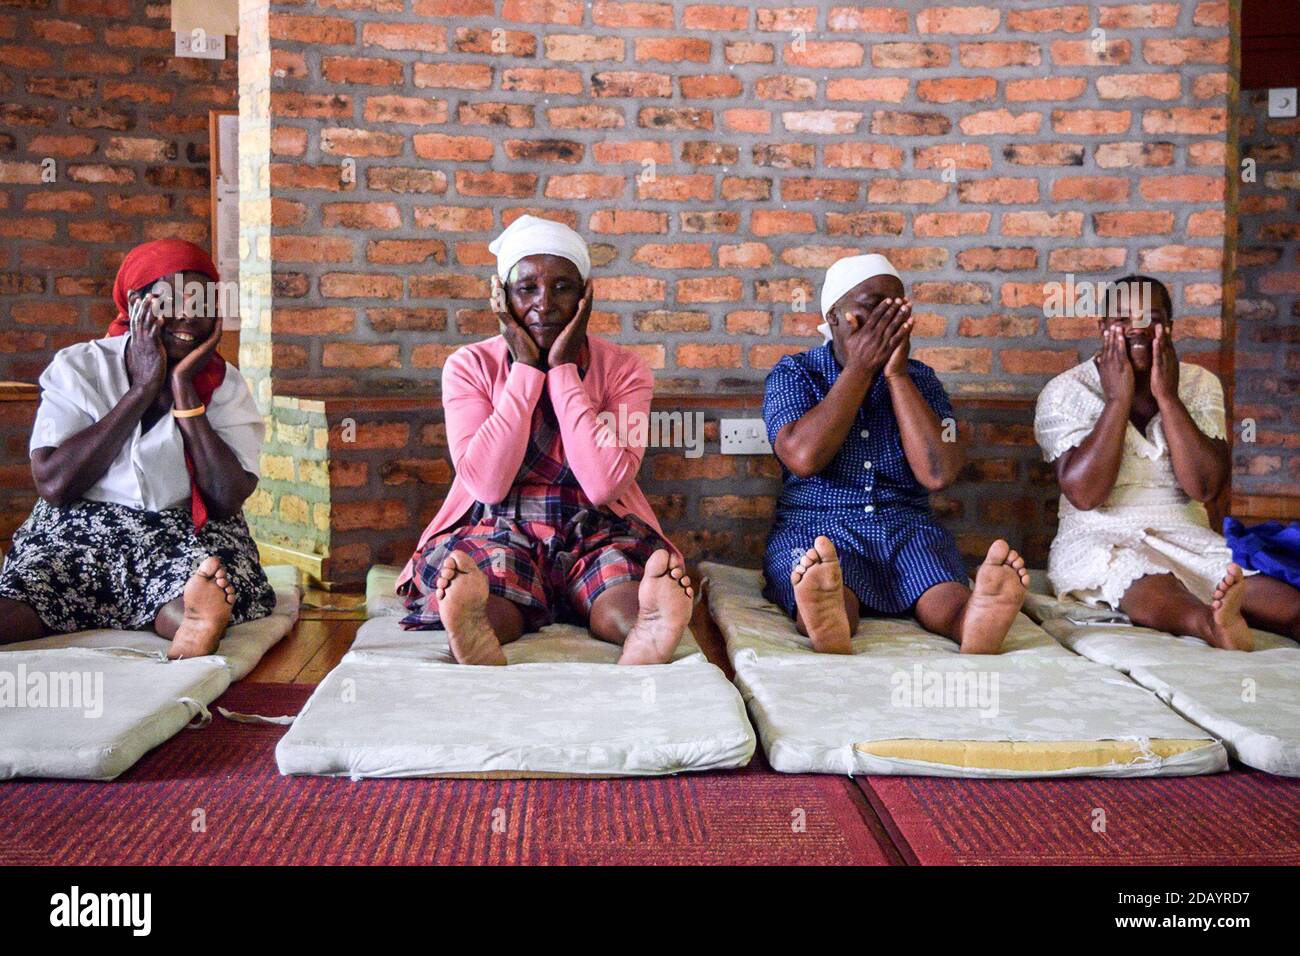 Women massage their hands, face and legs as a relaxation technique during Tara Rokpa therapy at the Rokpa Support Network in the Harare suburb of Monavale, Zimbabwe. Stock Photo